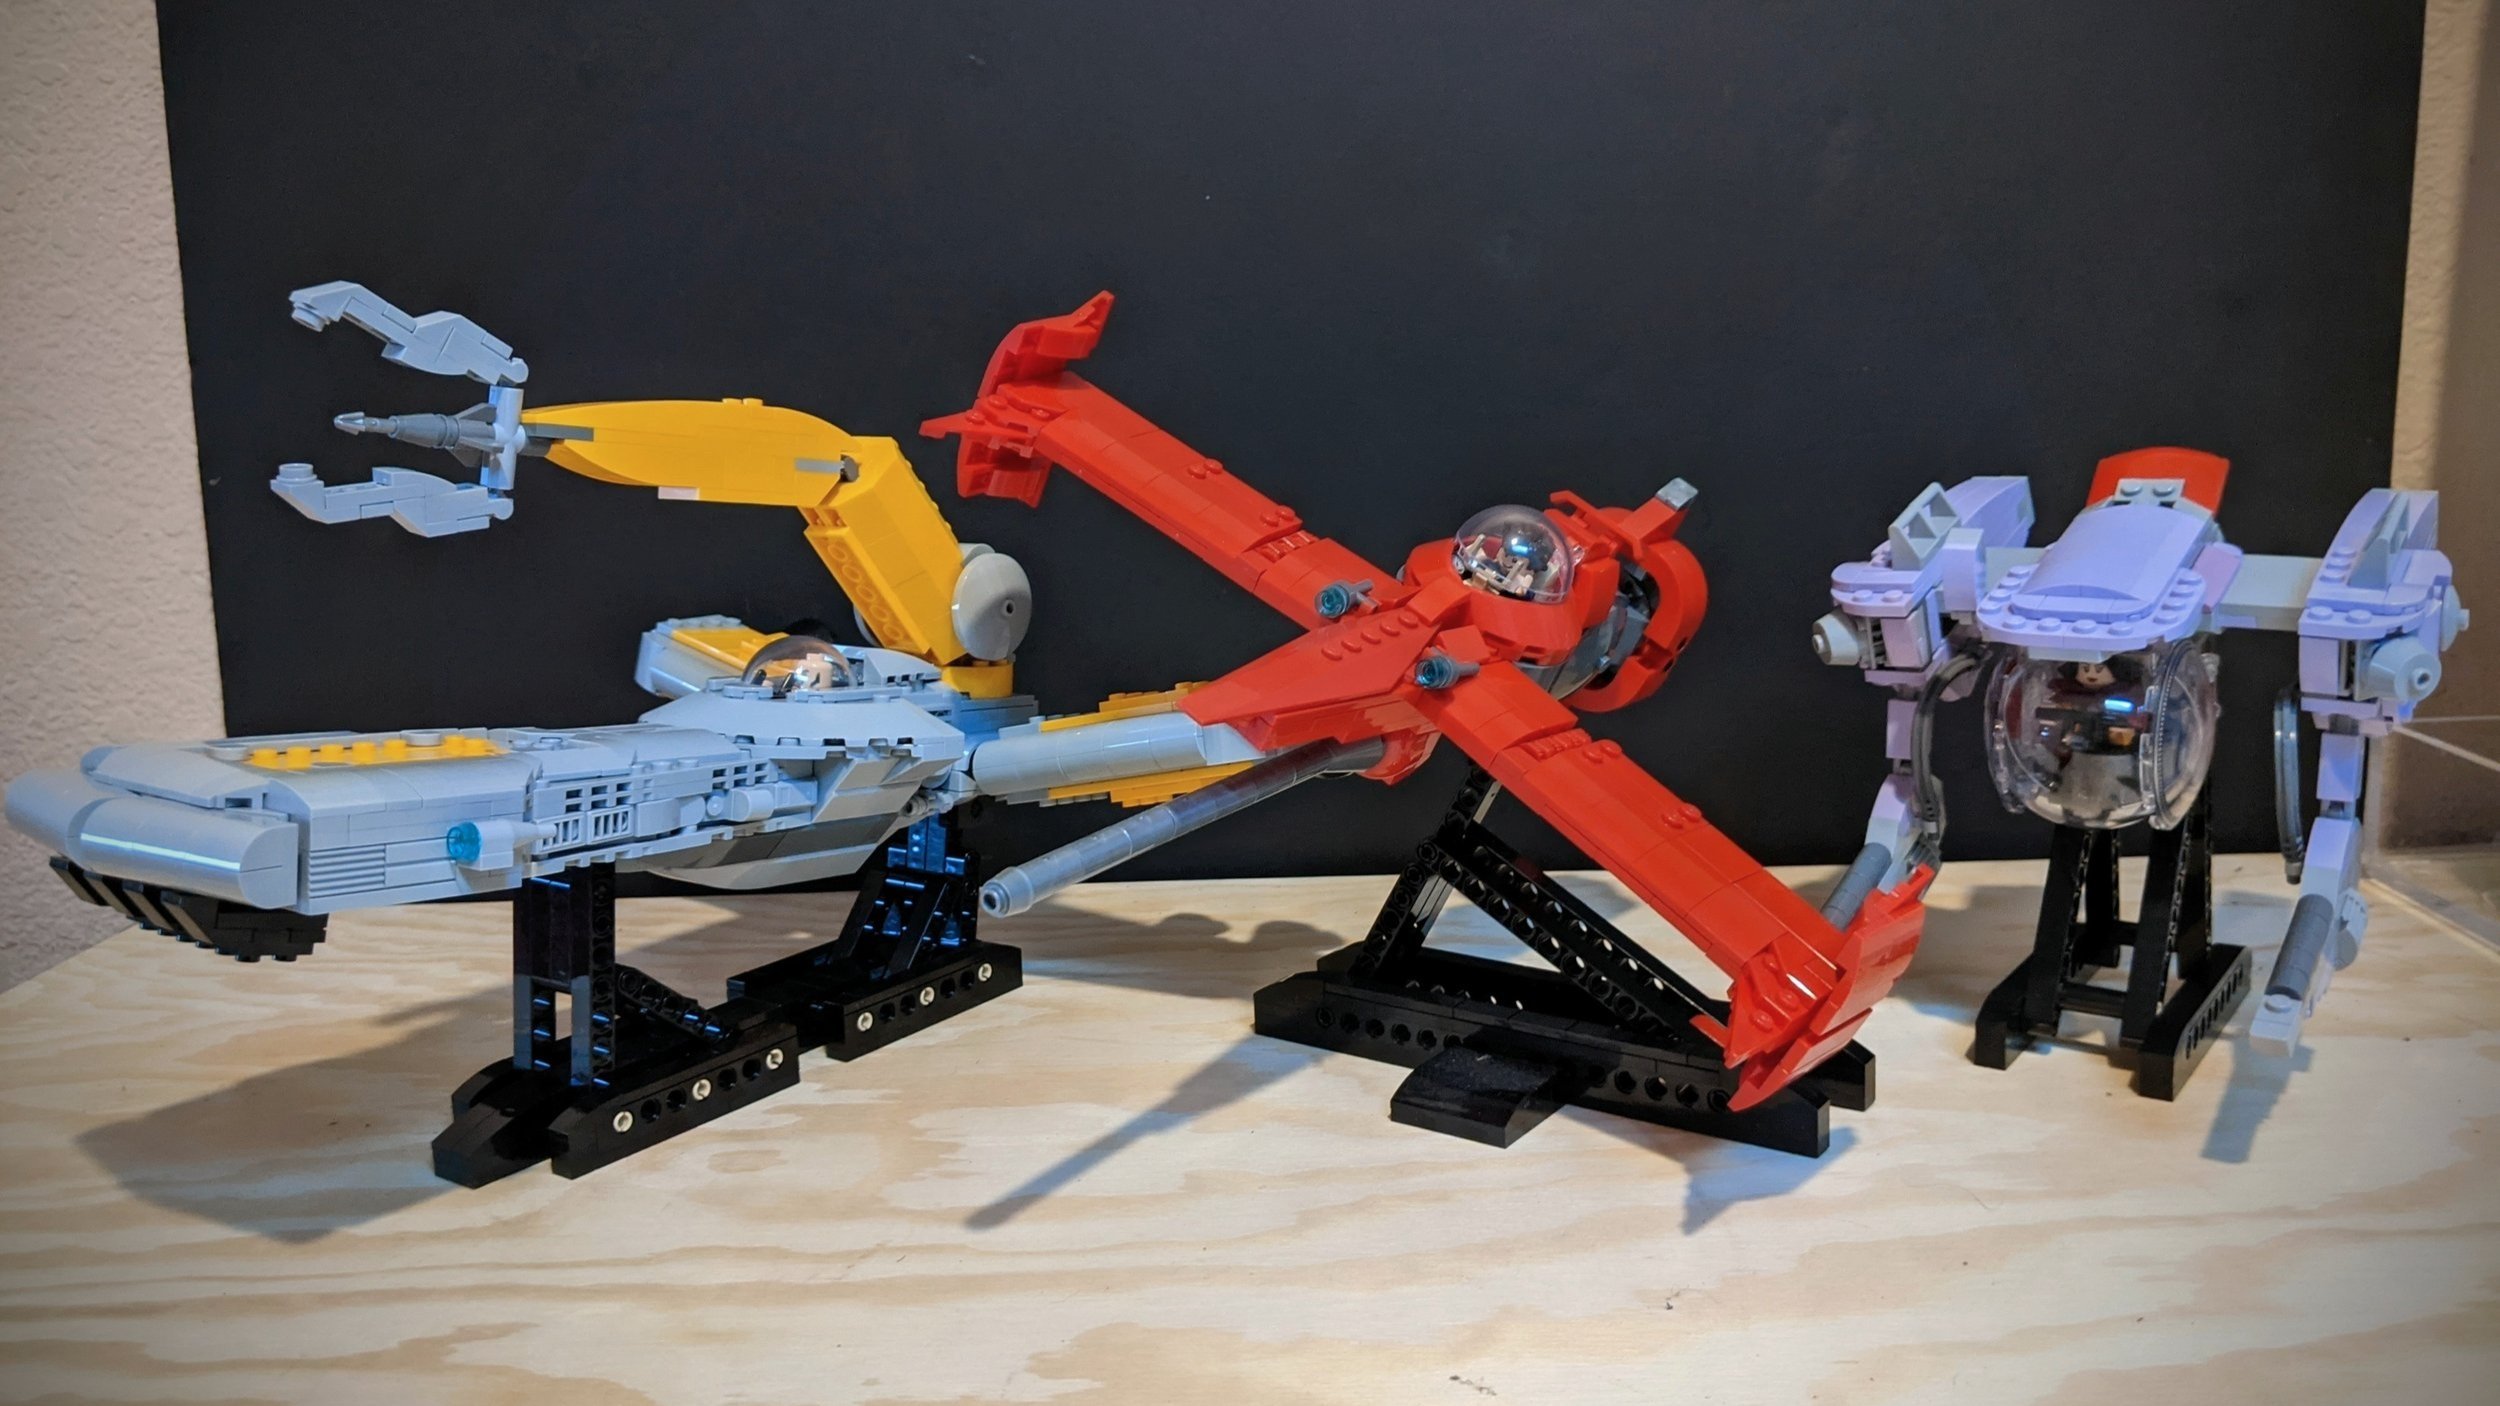 Cowboy Bebop: I Think It's Time To Blow This Scene - BrickNerd - All things  LEGO and the LEGO fan community